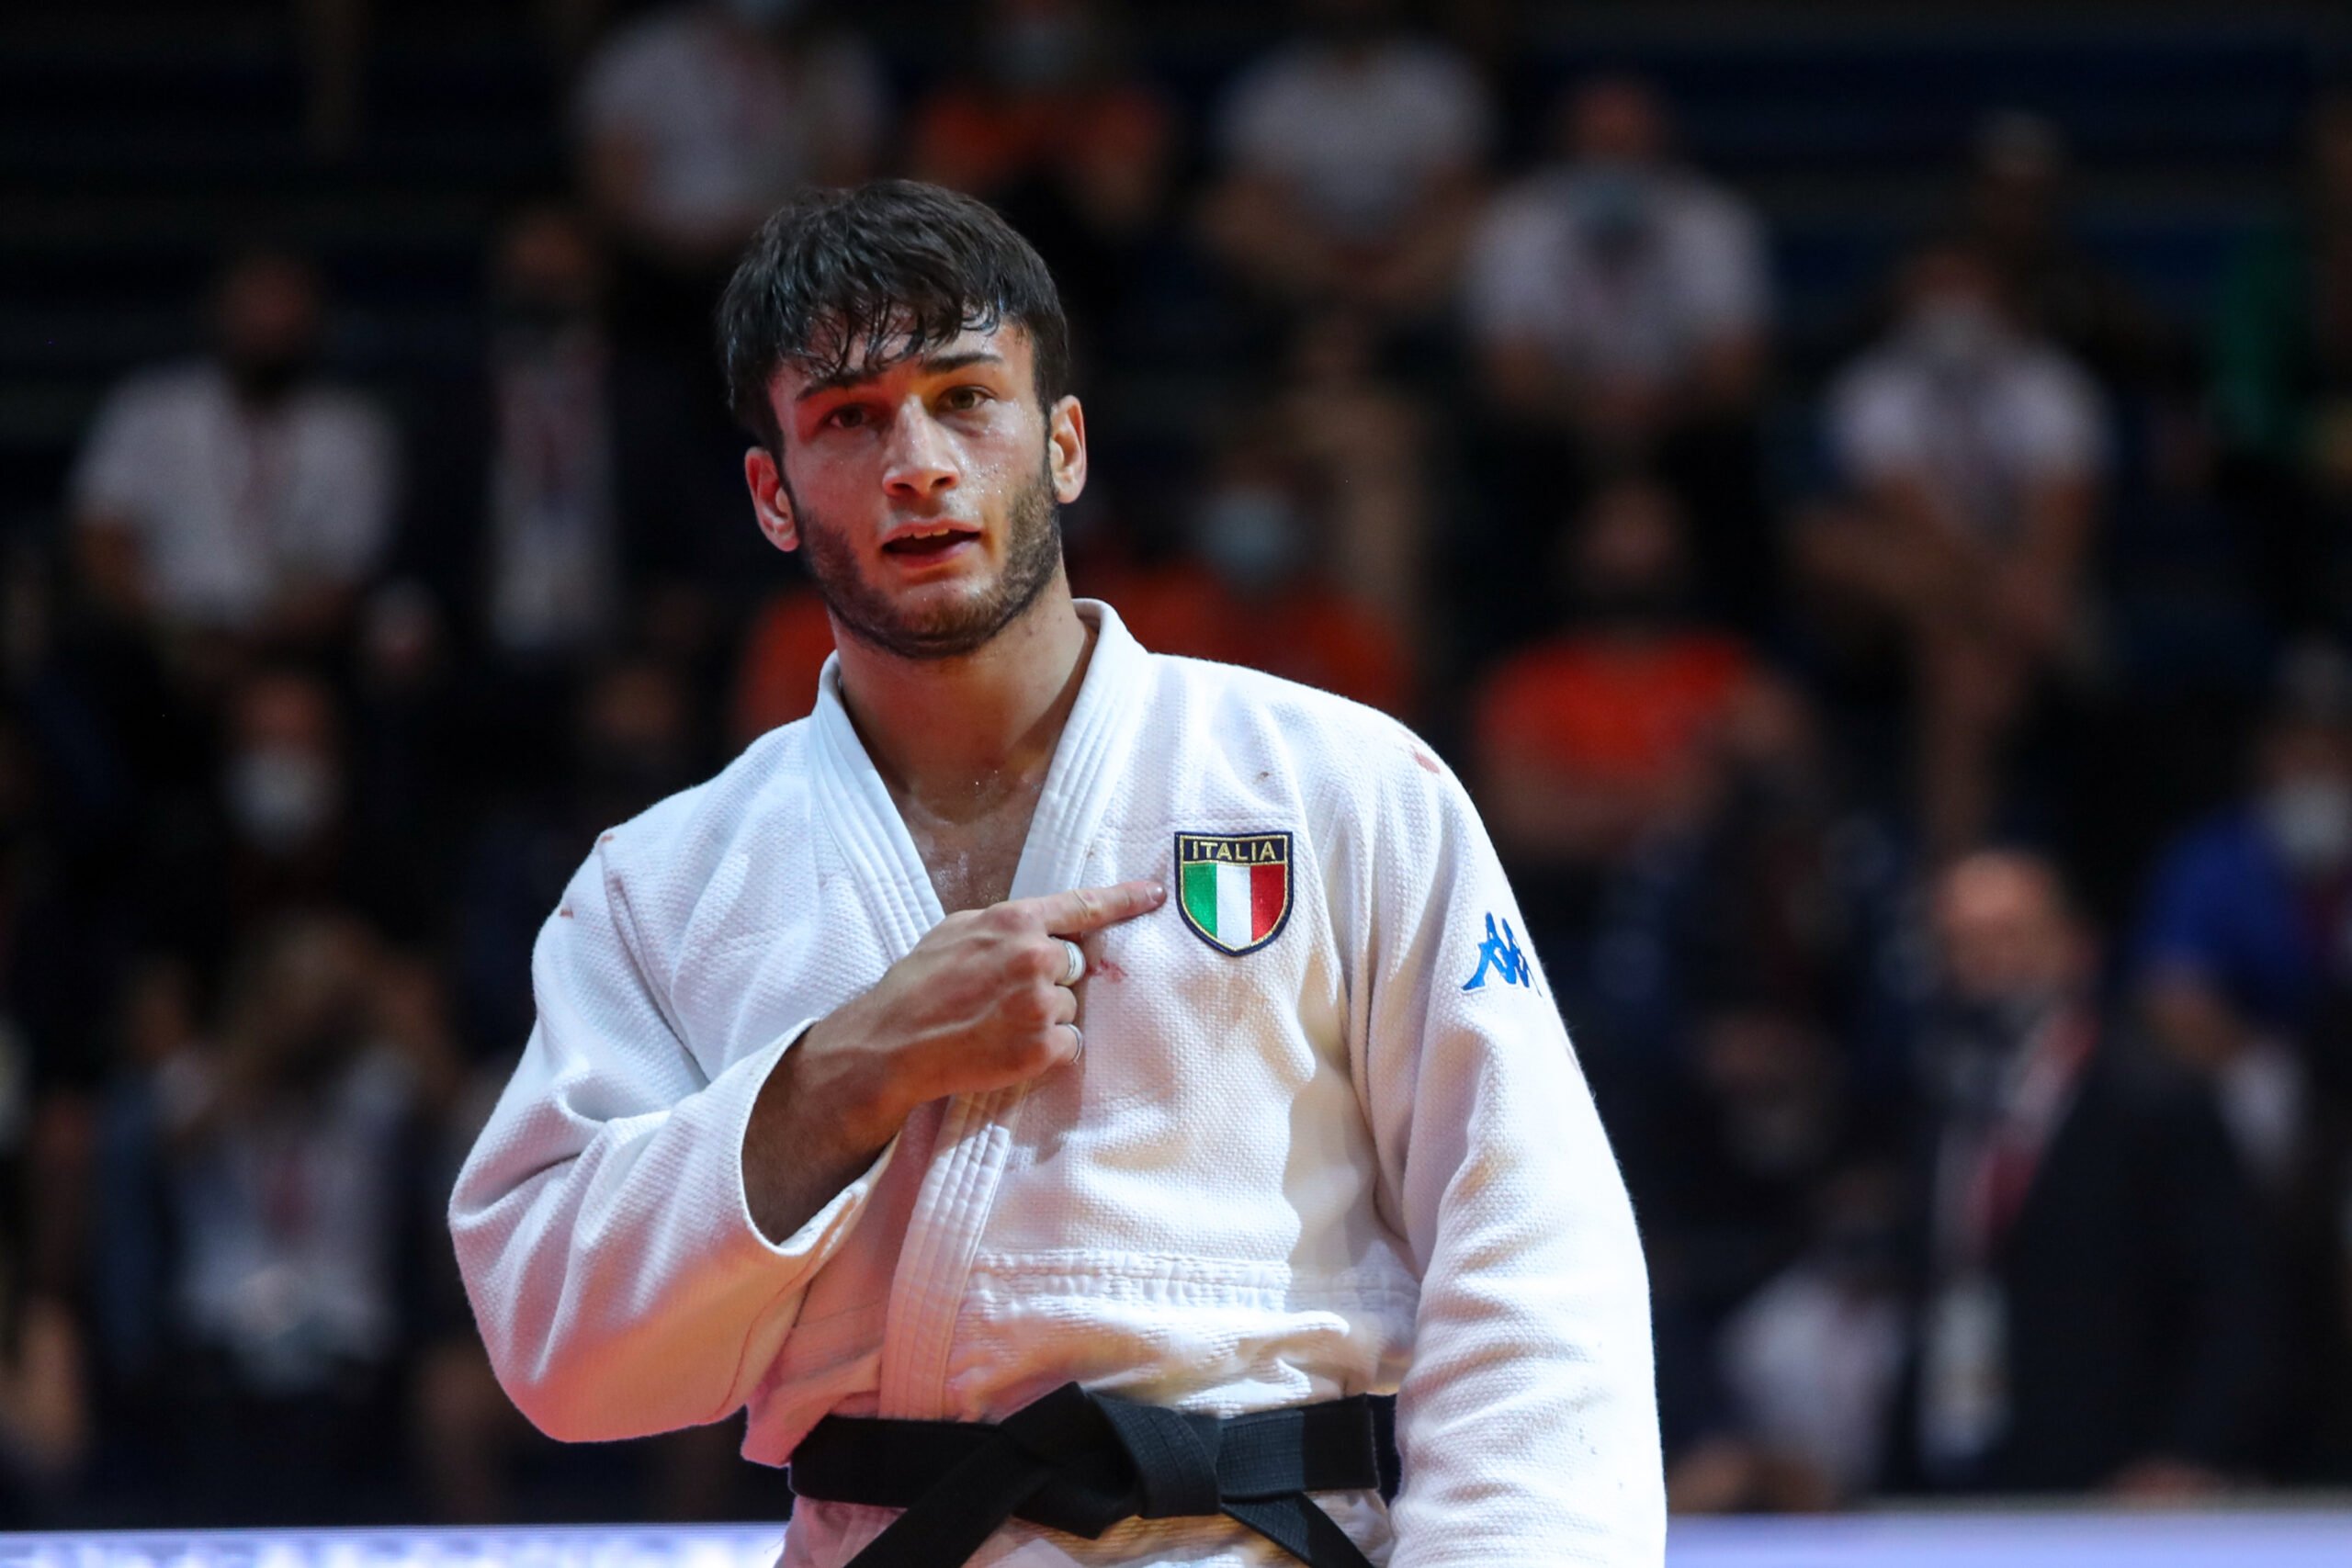 ITALY HOSTS JUNIOR EUROPEAN CUP WITH NUMEROUS TOP SEEDS